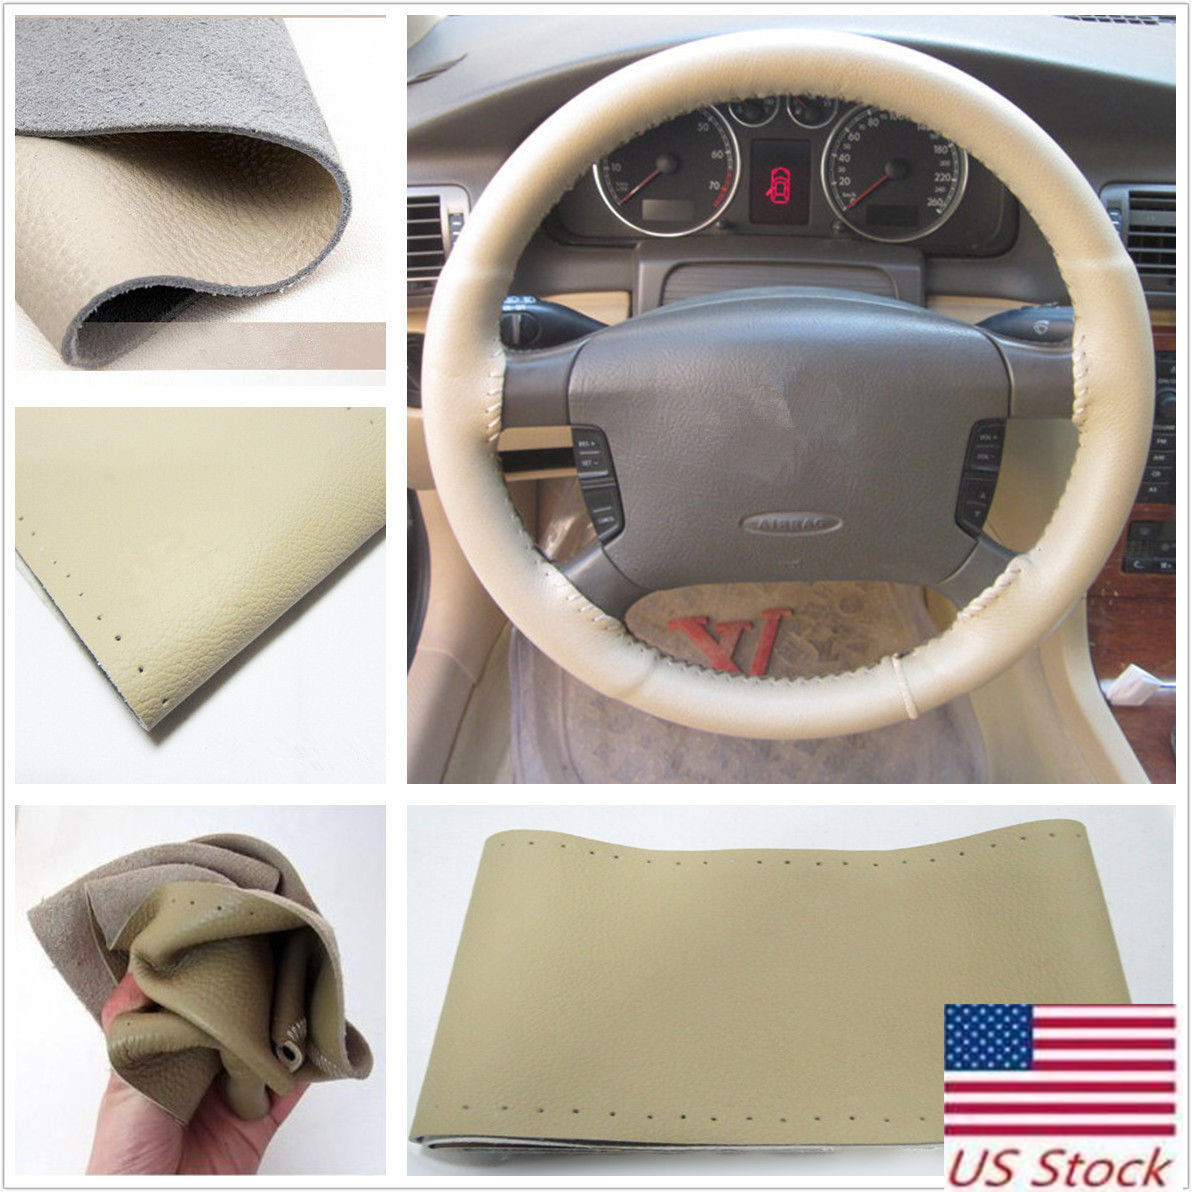 DIY Leather Car Auto Steering Wheel Cover 38cm With Needles and Thread US Stock